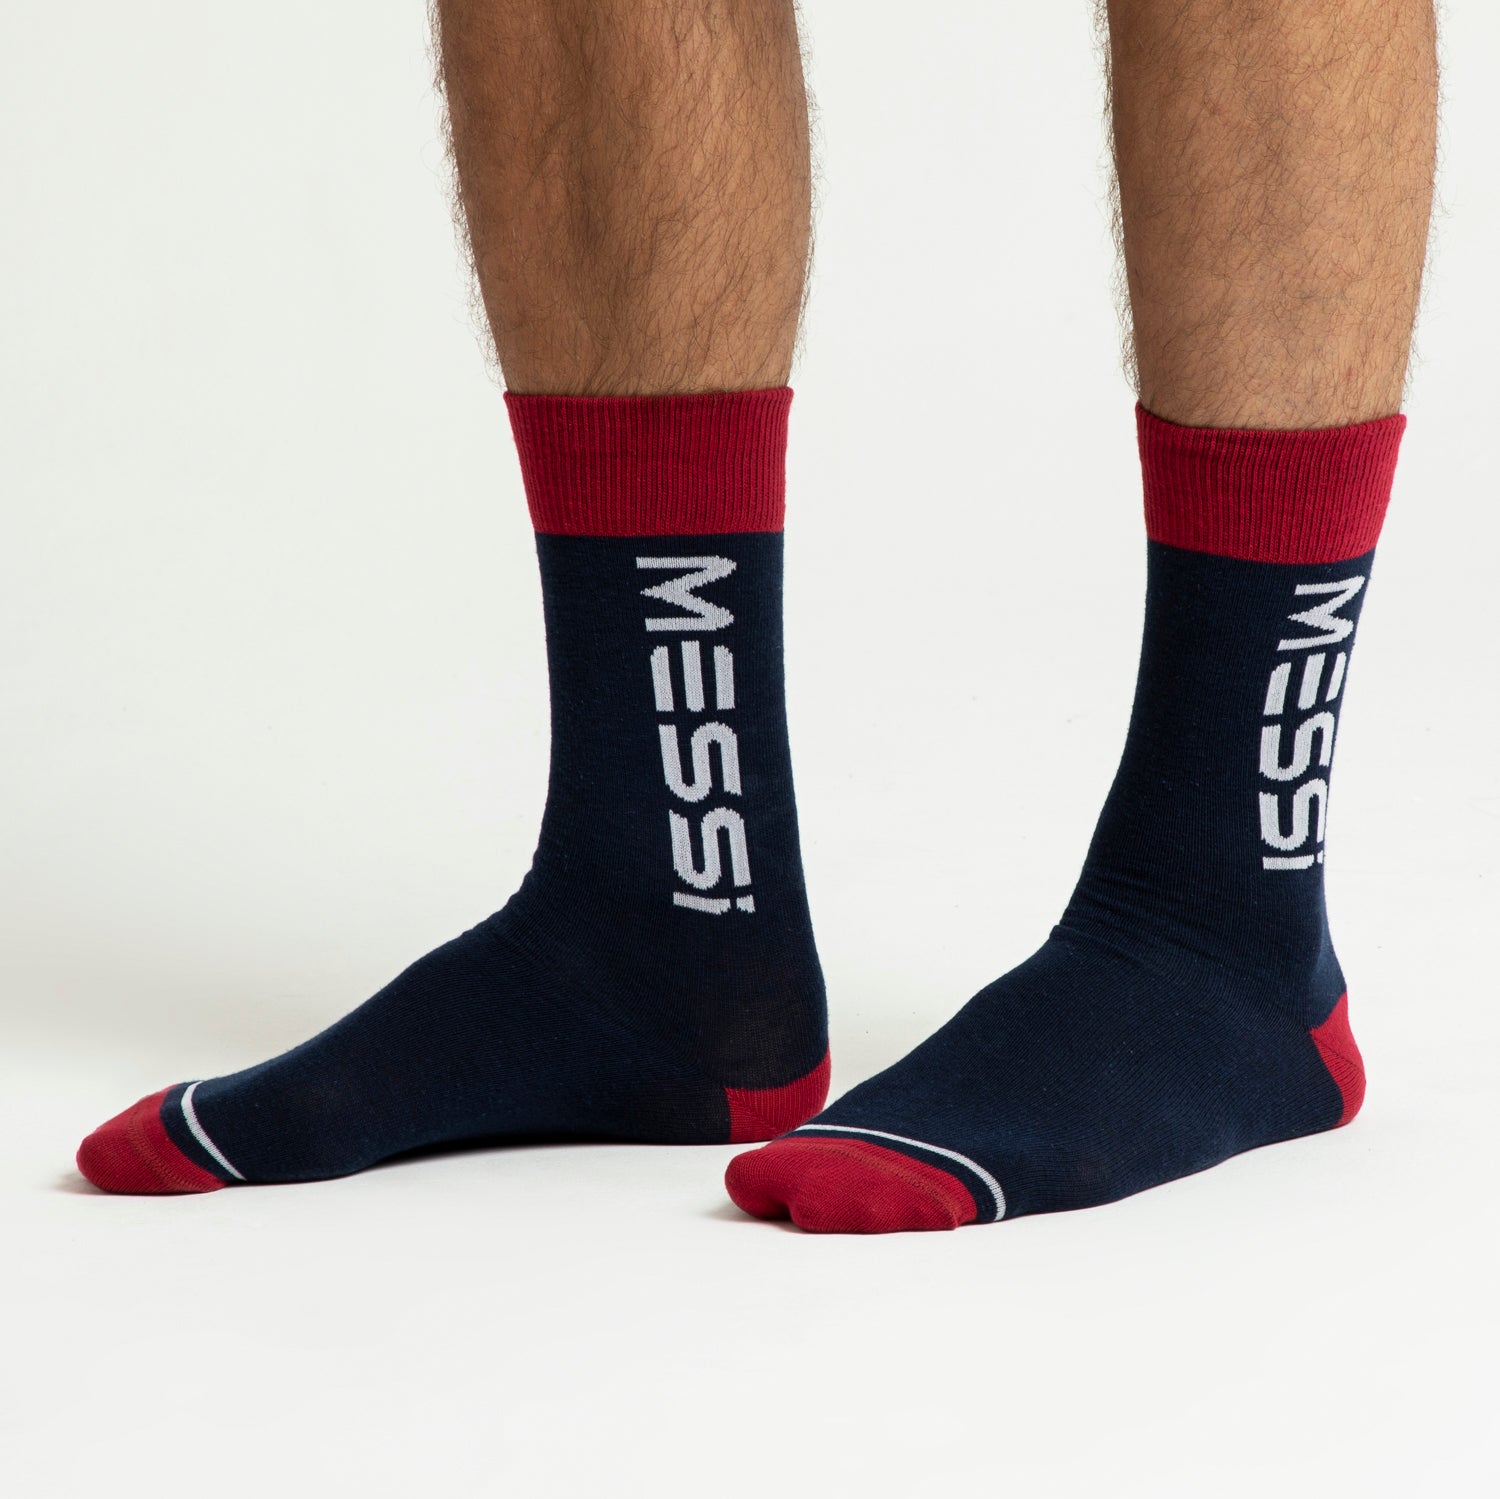 Get Ready: Messi Socks Have Arrived! - The Messi Store